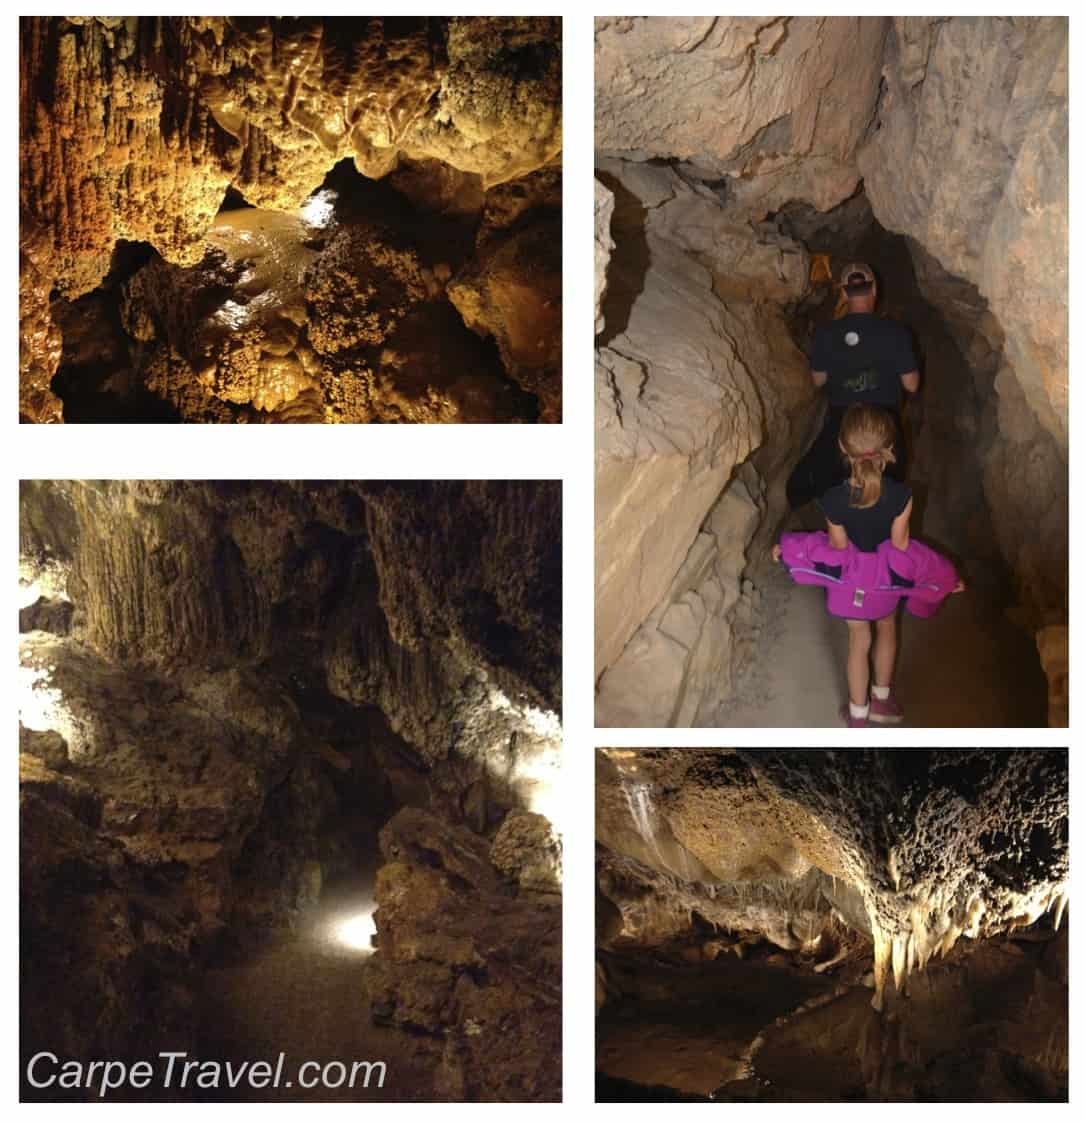 The Historic Fairy Caves in Glenwood Springs